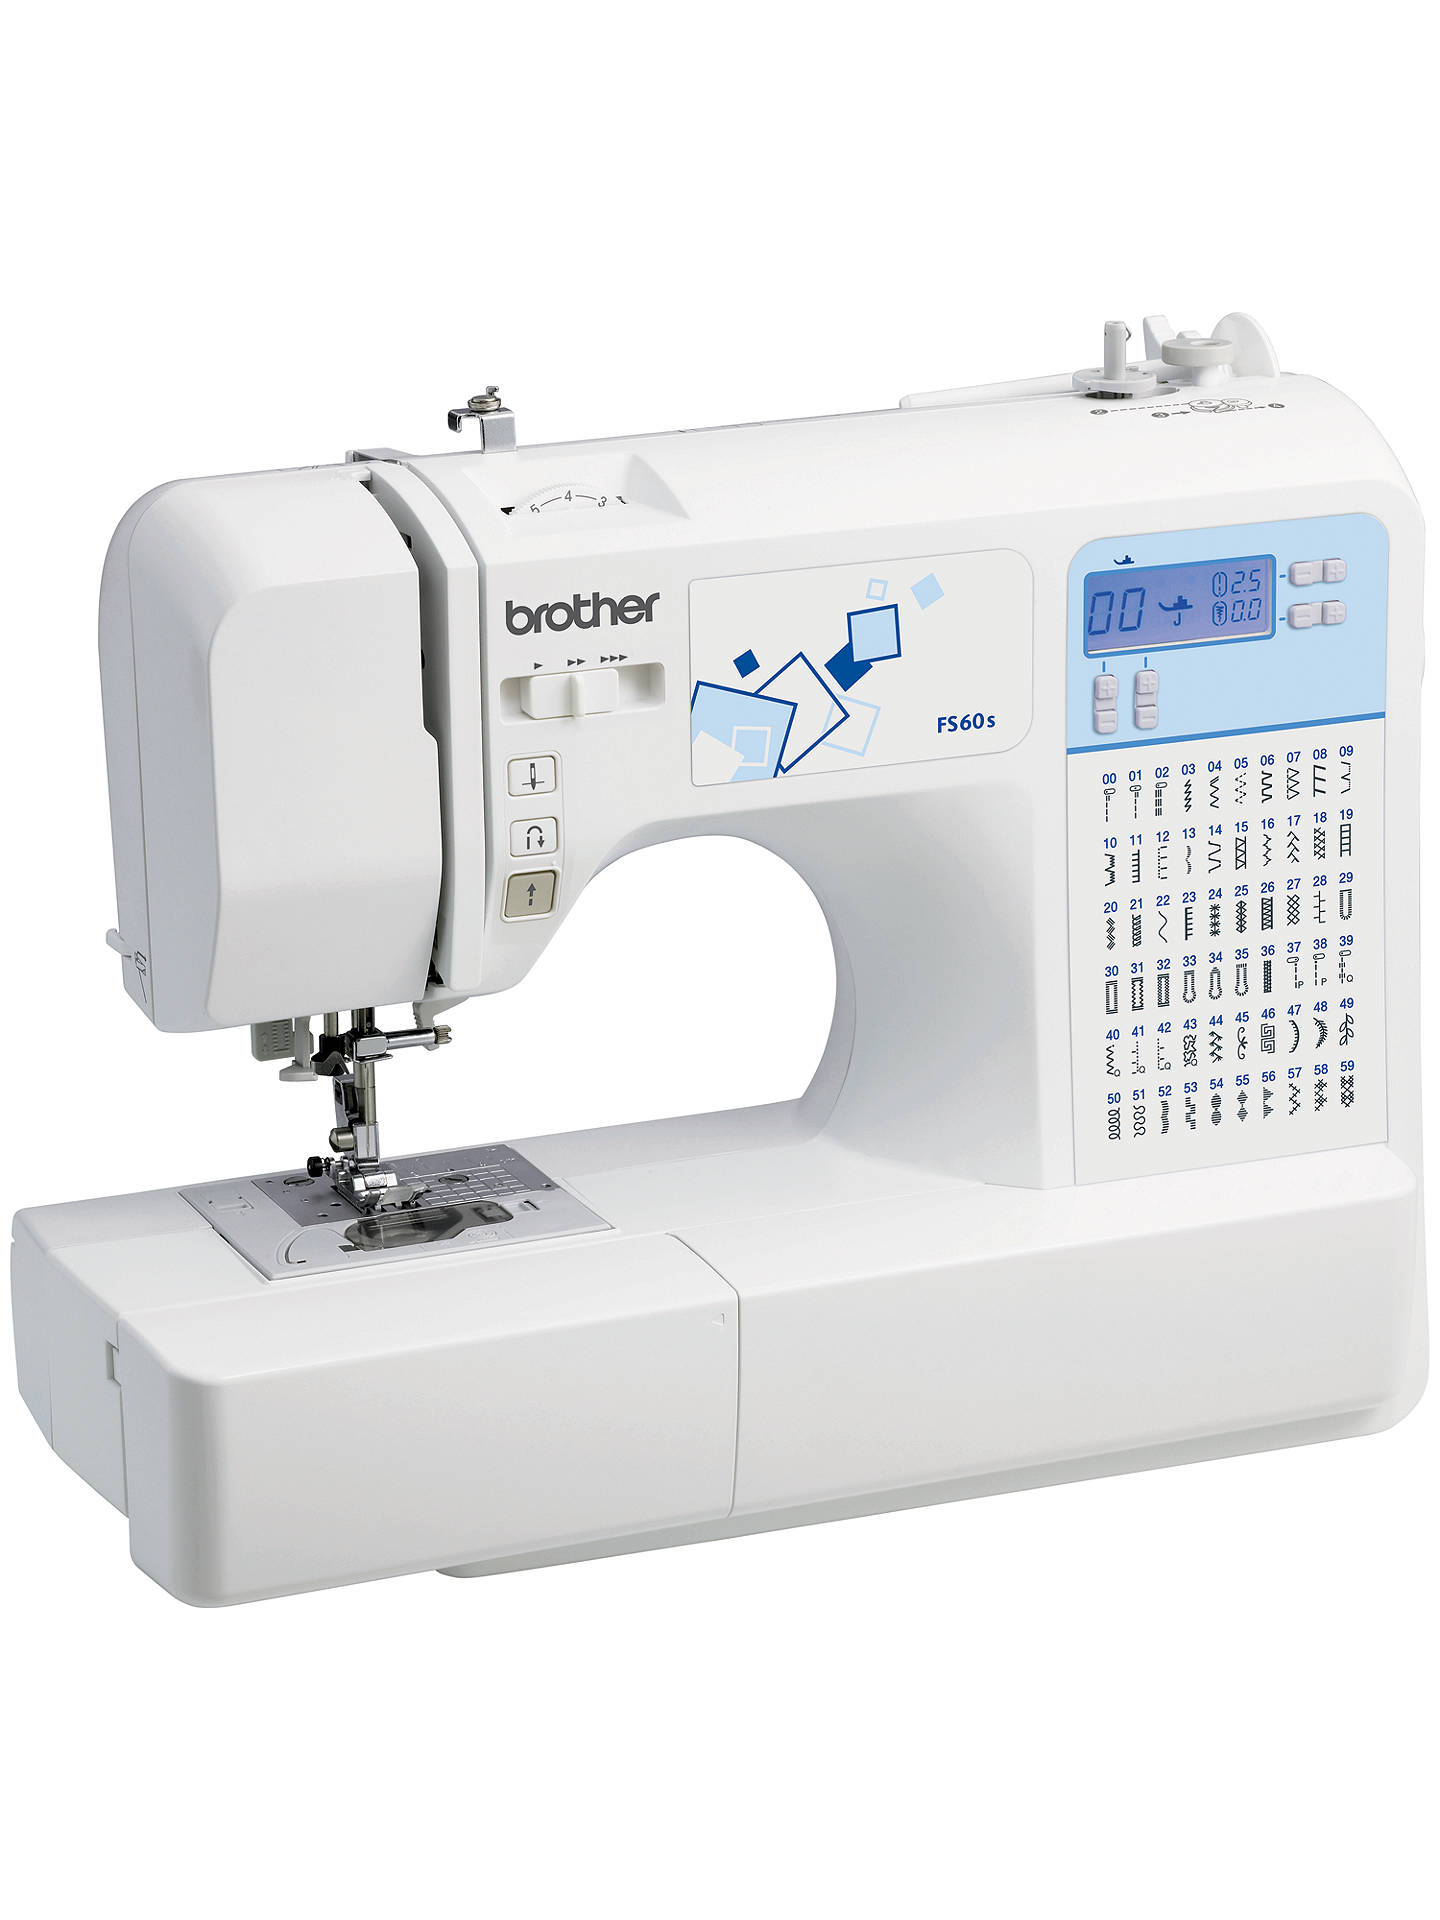 Brother FS60s Electronic Sewing Machine